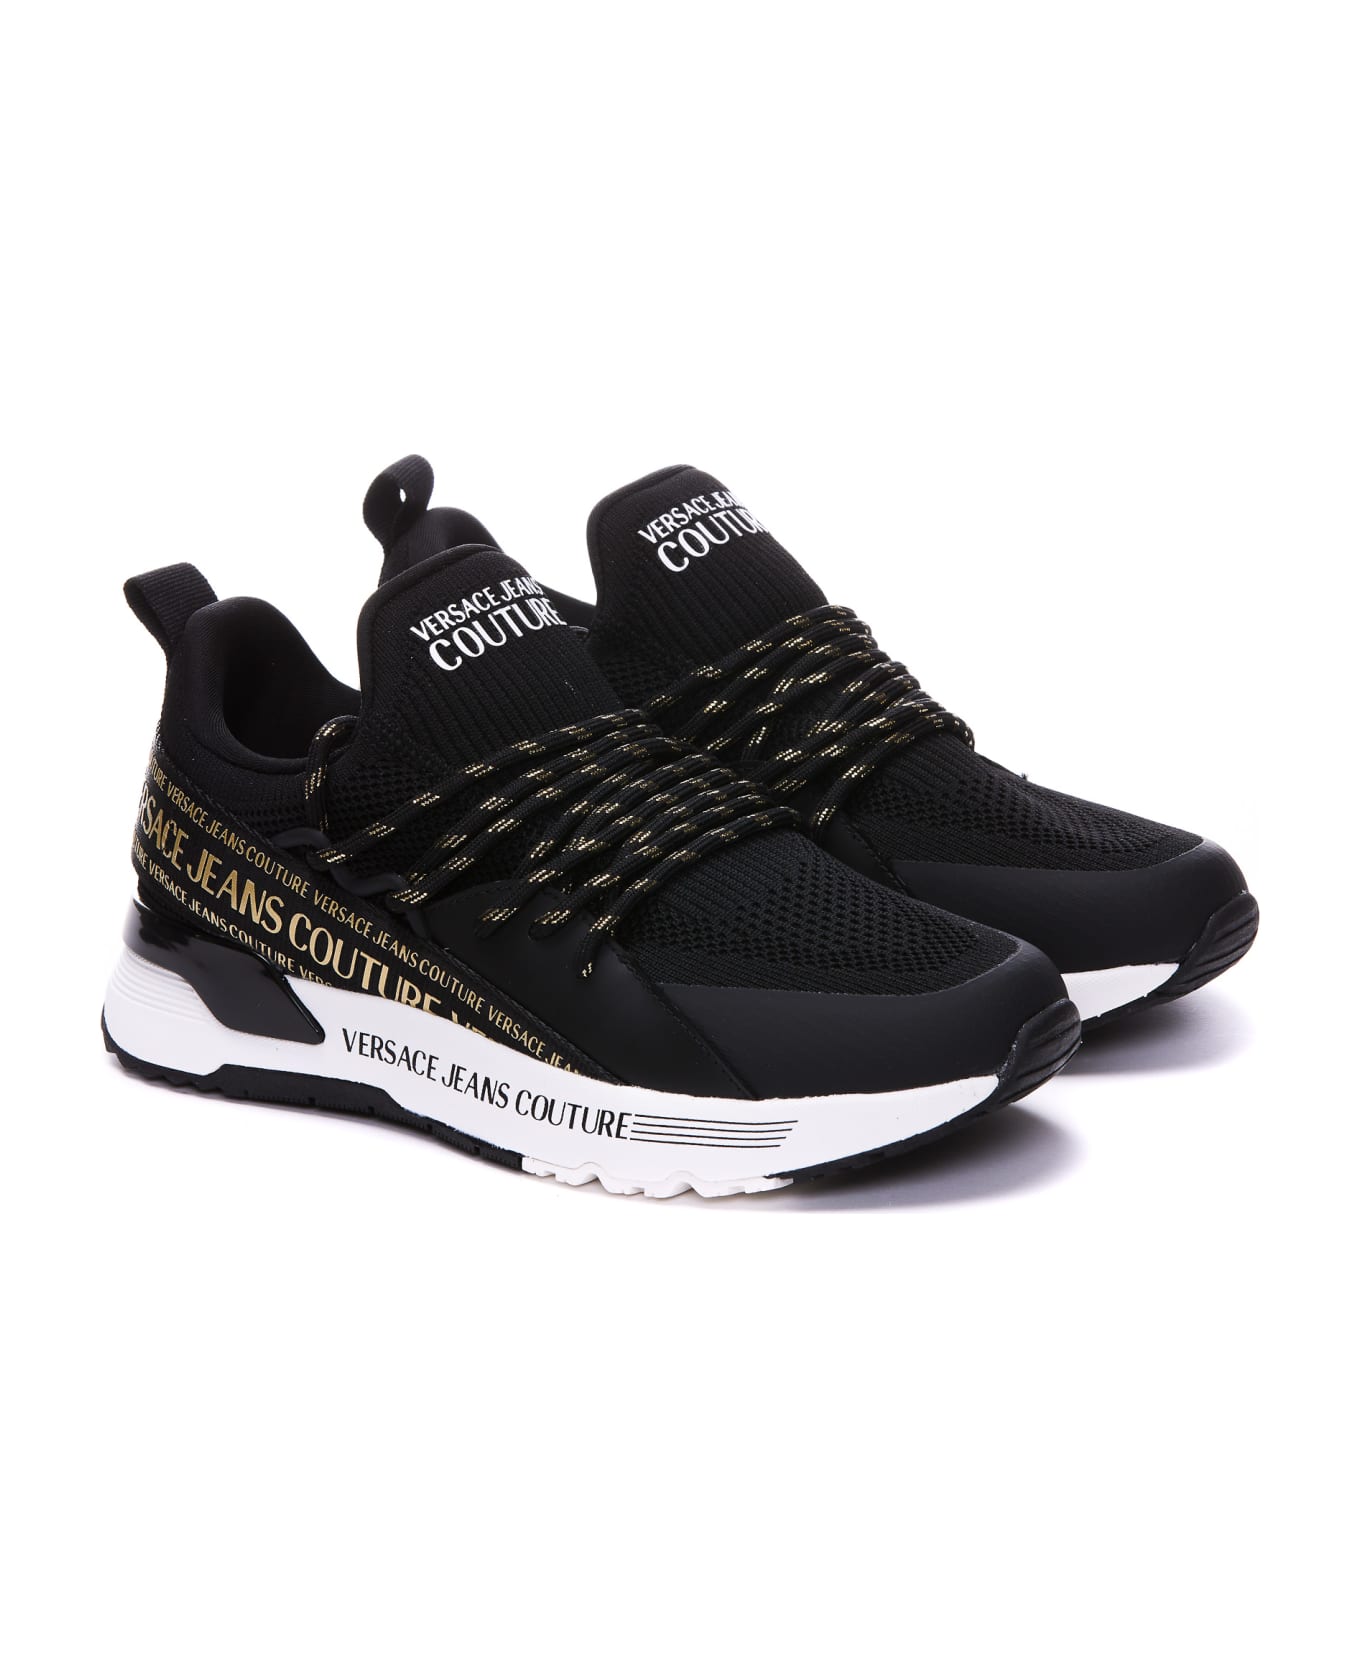 Versace Jeans Couture Dynamic Sneakers - BLACK/GOLD